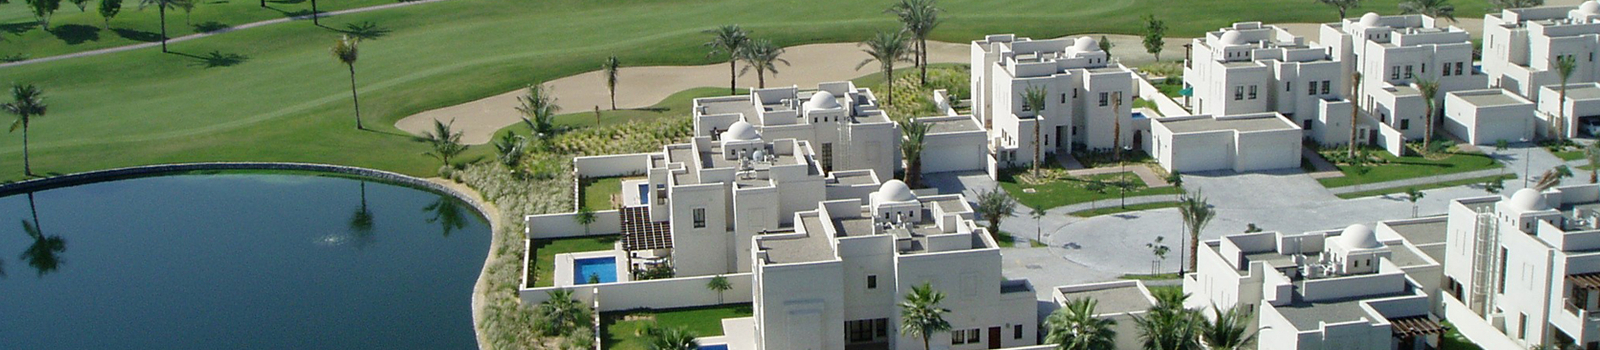 <strong>Our service is our key differentiator </strong><br/><br/><span>Villas at Dubai Creek Golf & Yacht Club - Dubai</span> 